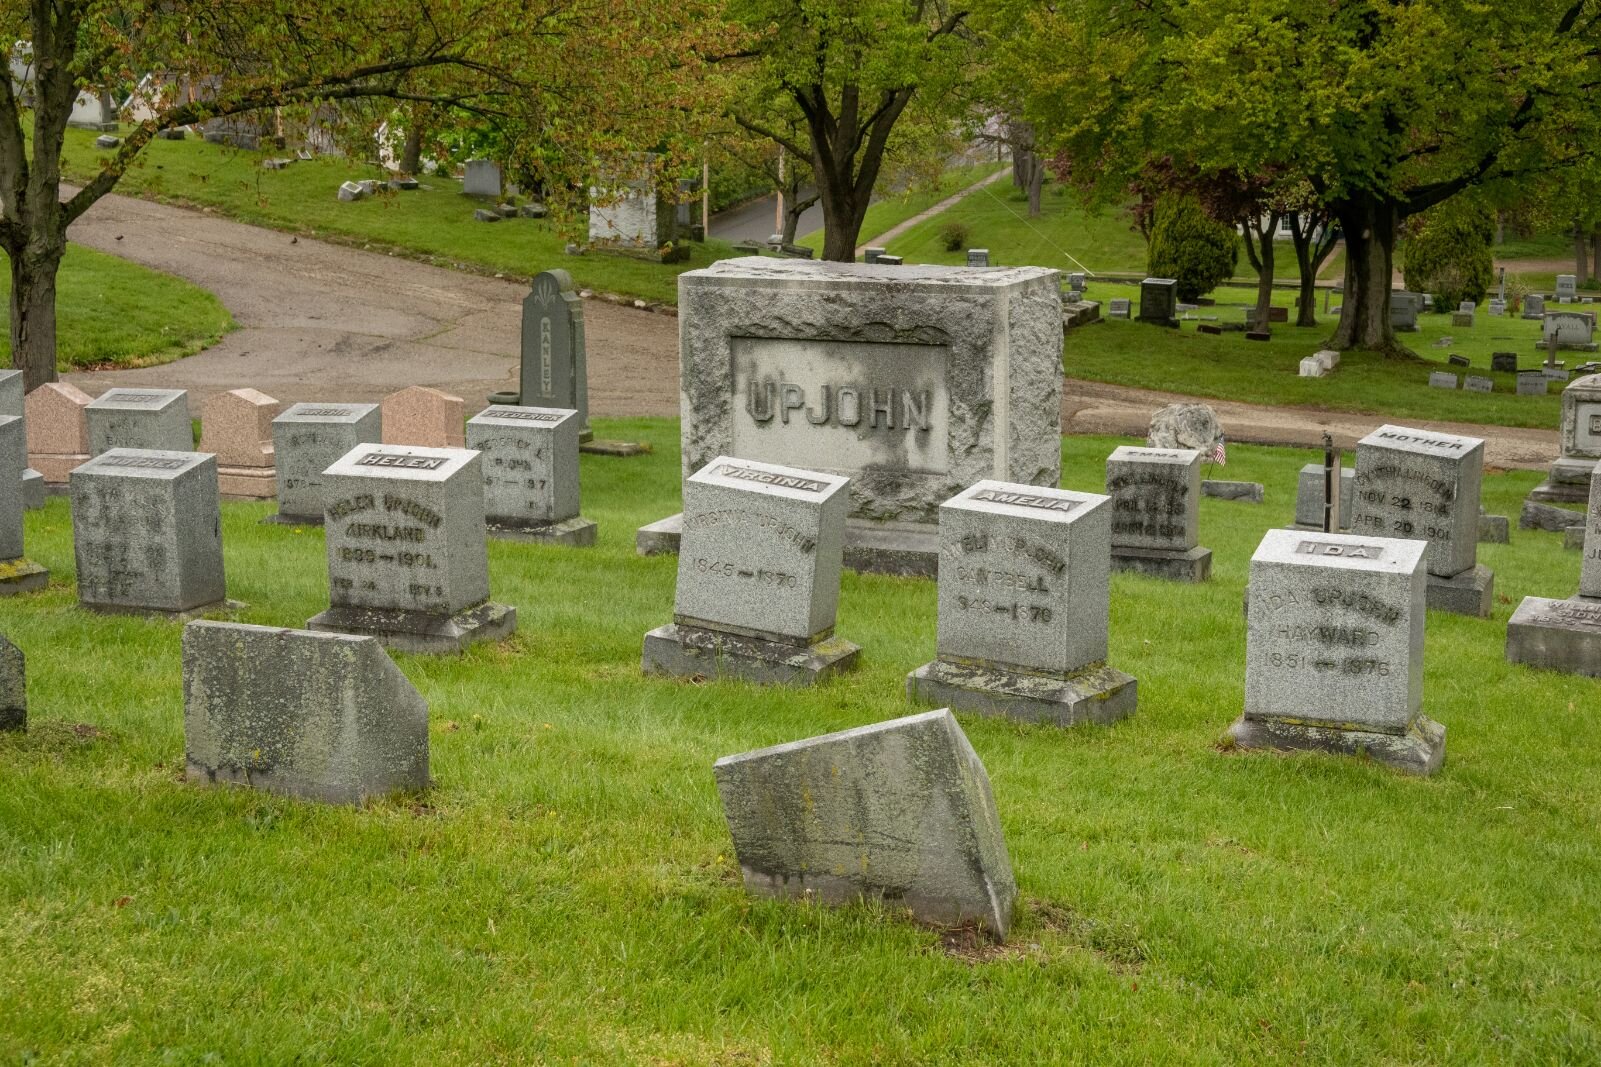 Opened in 1850, Mountain Home Cemetery was originally a private cemetery. It was not opened to the public until it was purchased by the City of Kalamazoo in 1940.